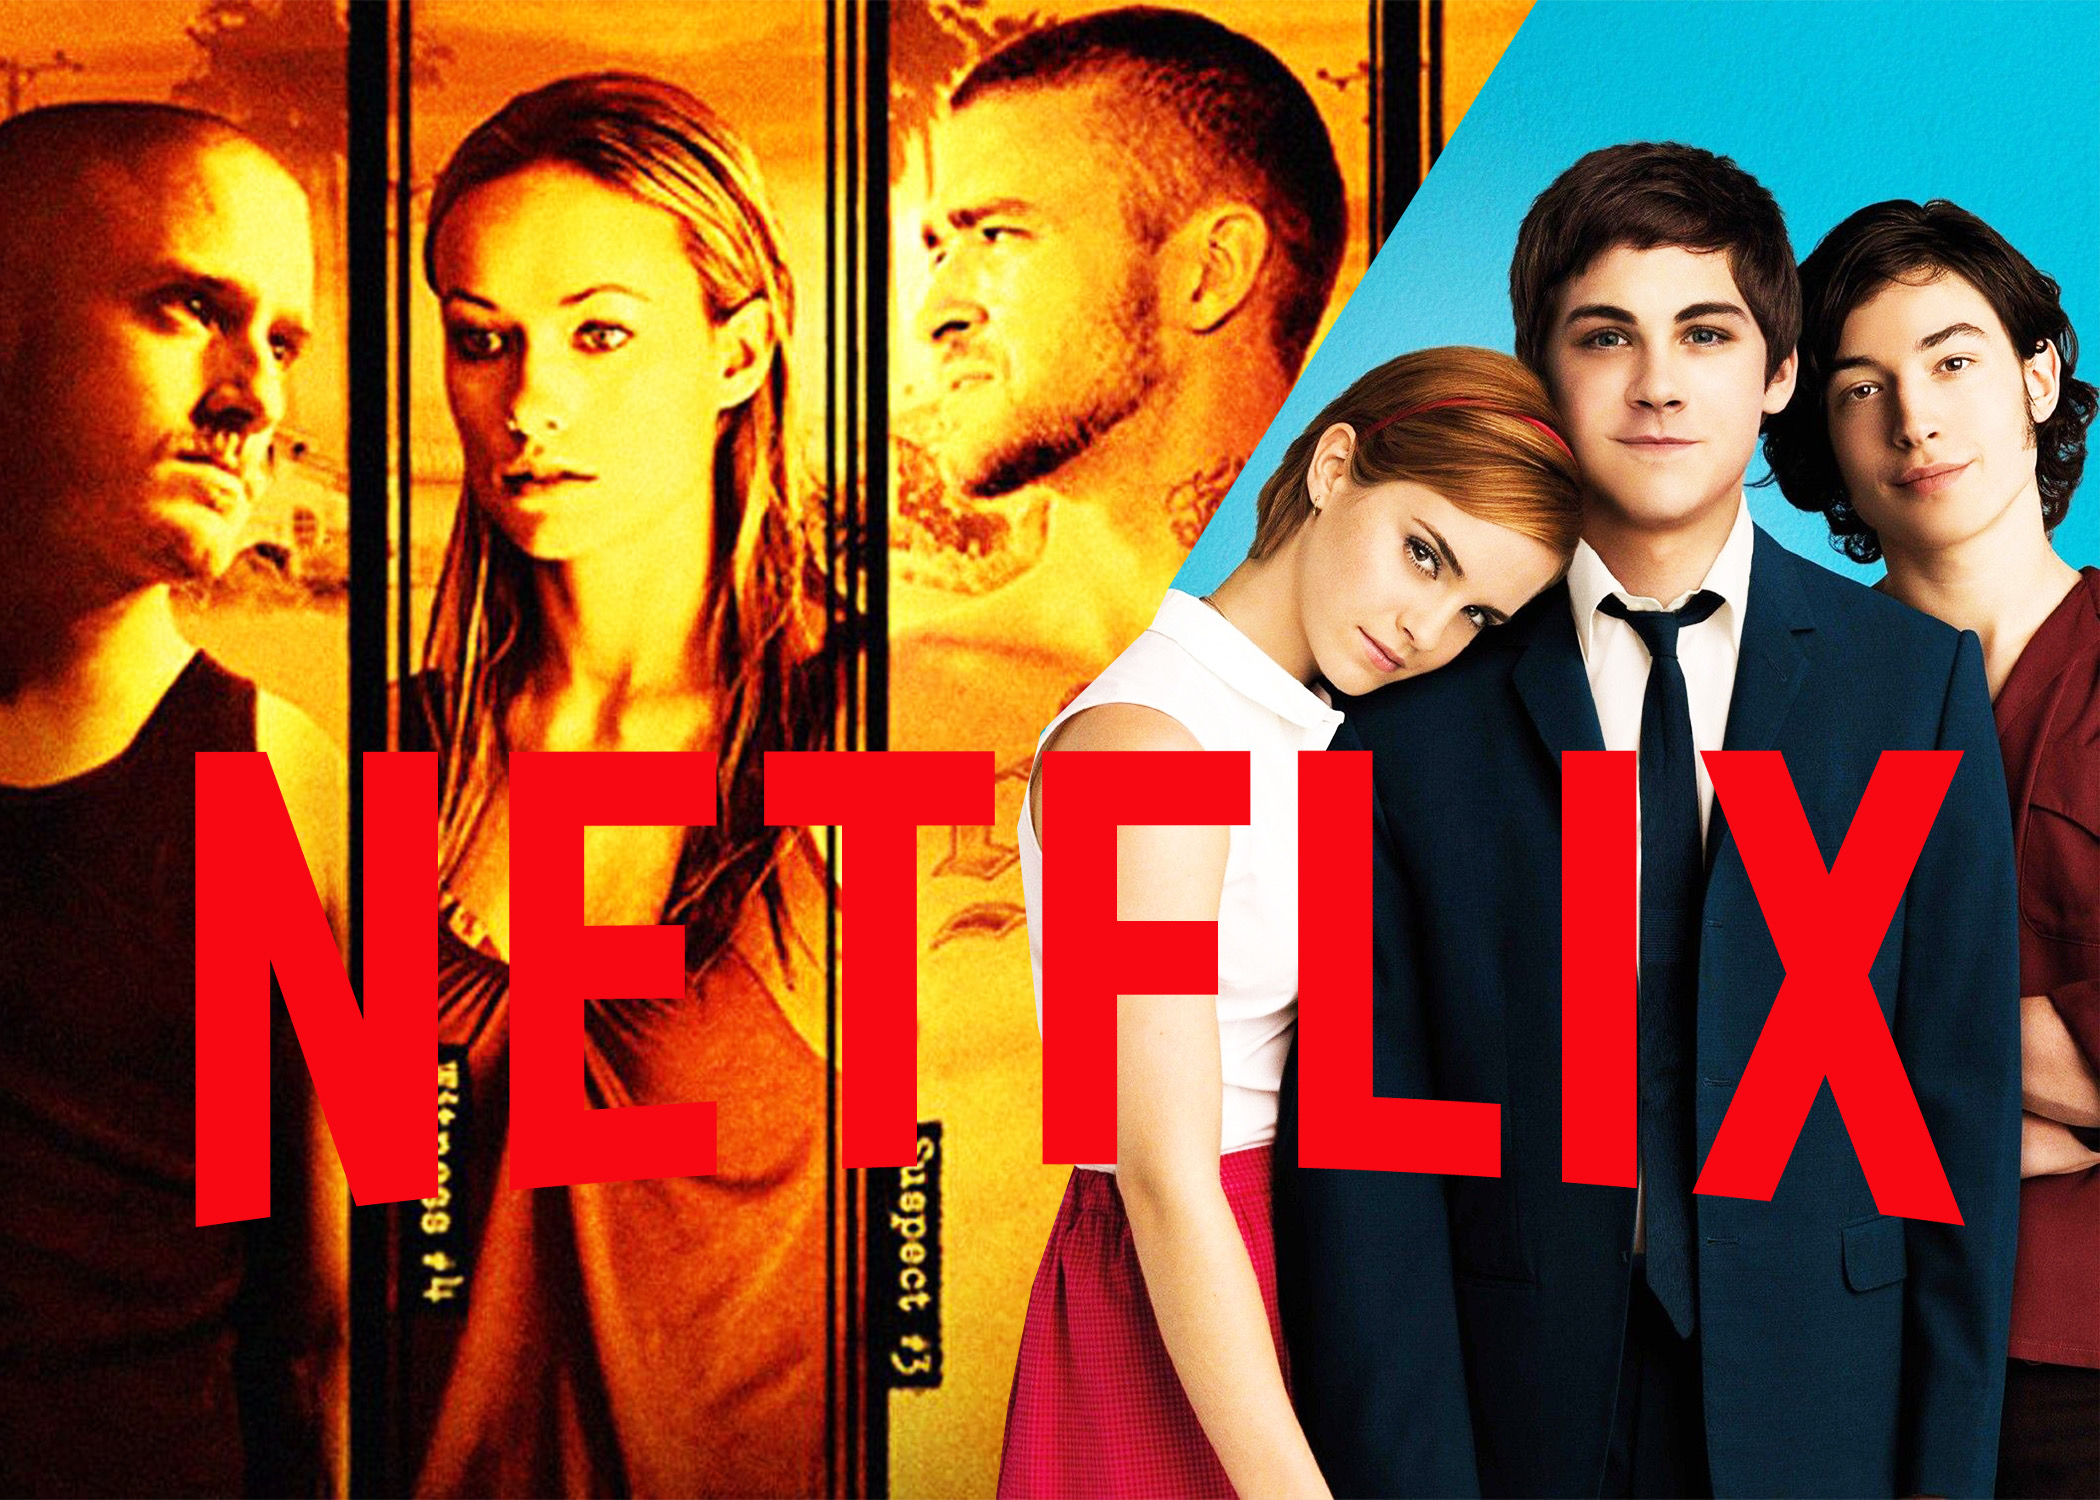 The Perks of Being a Wallflower Official Trailer #1 (2012) - Emma Watson  Movie HD 